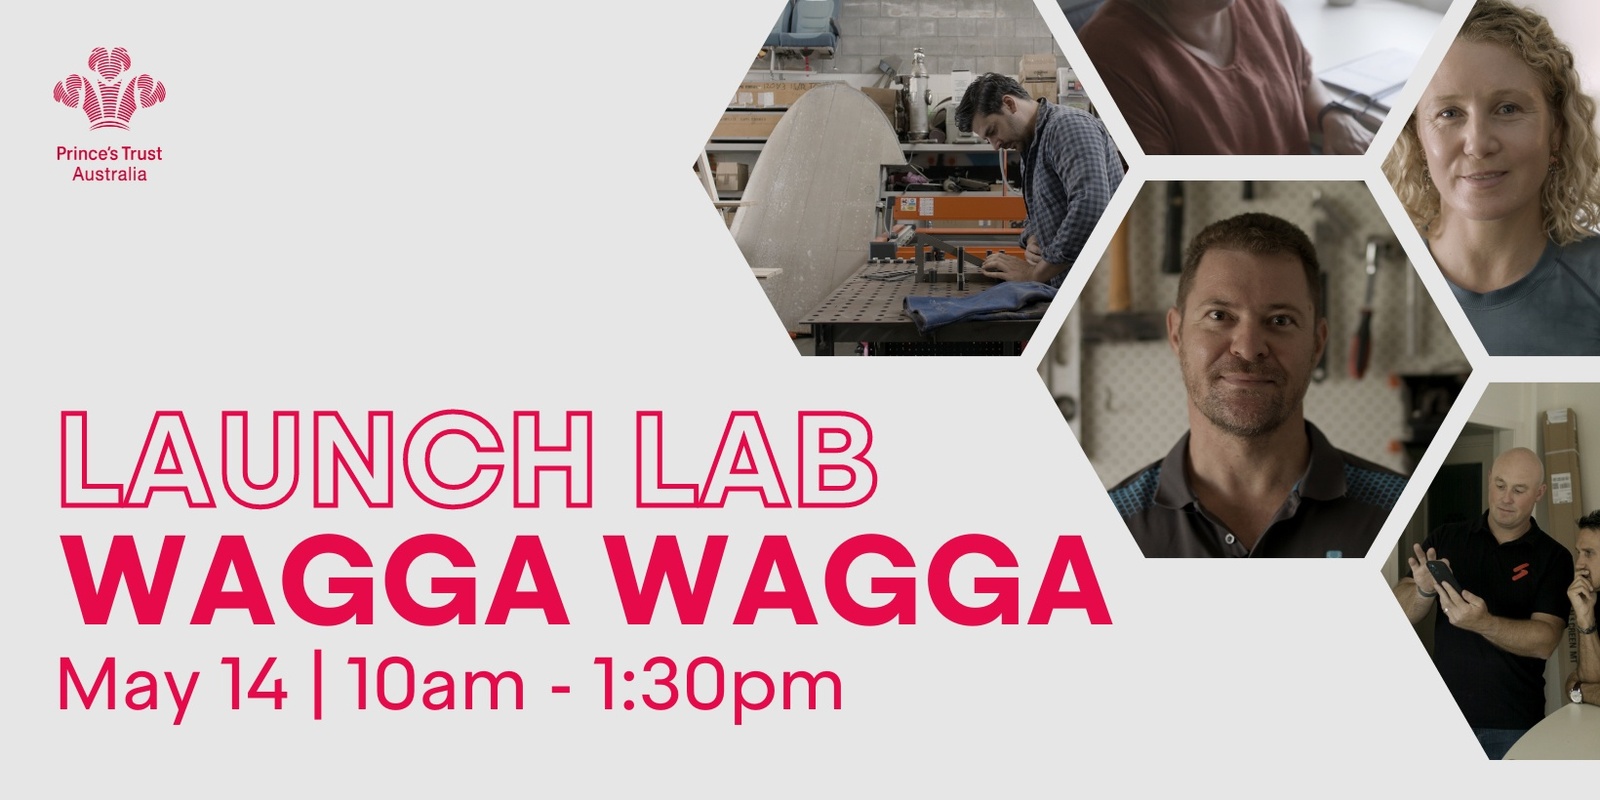 Banner image for Launch Lab Wagga Wagga